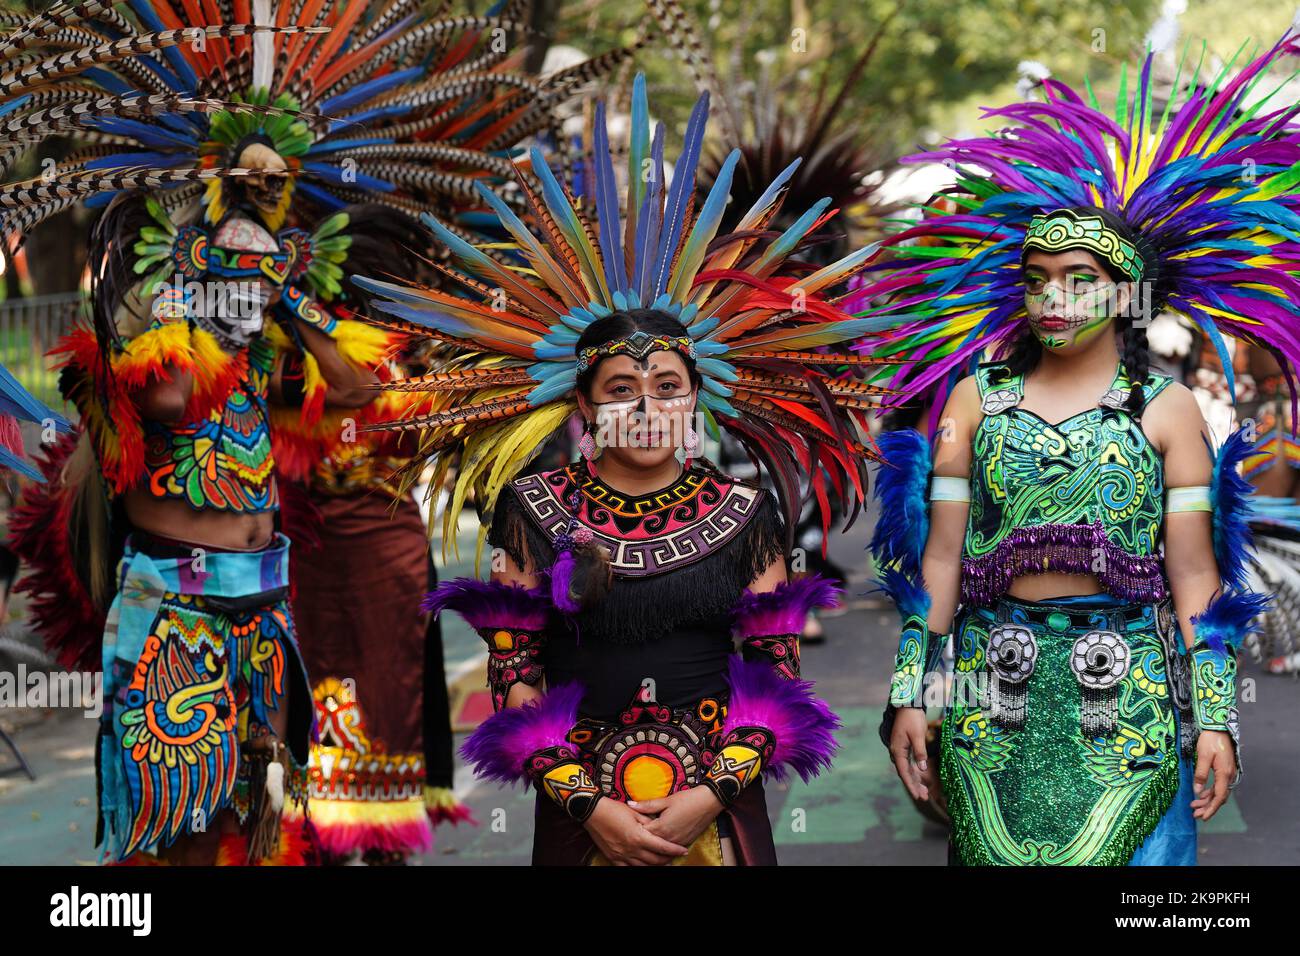 Mexico City, Mexico. 29th Oct, 2022. Indigenous dancers line up before marching in the Grand Parade of the Dead to celebrate Dia de los Muertos holiday on Paseo de la Reforma, October 29, 2022 in Mexico City, Mexico. Credit: Richard Ellis/Richard Ellis/Alamy Live News Stock Photo